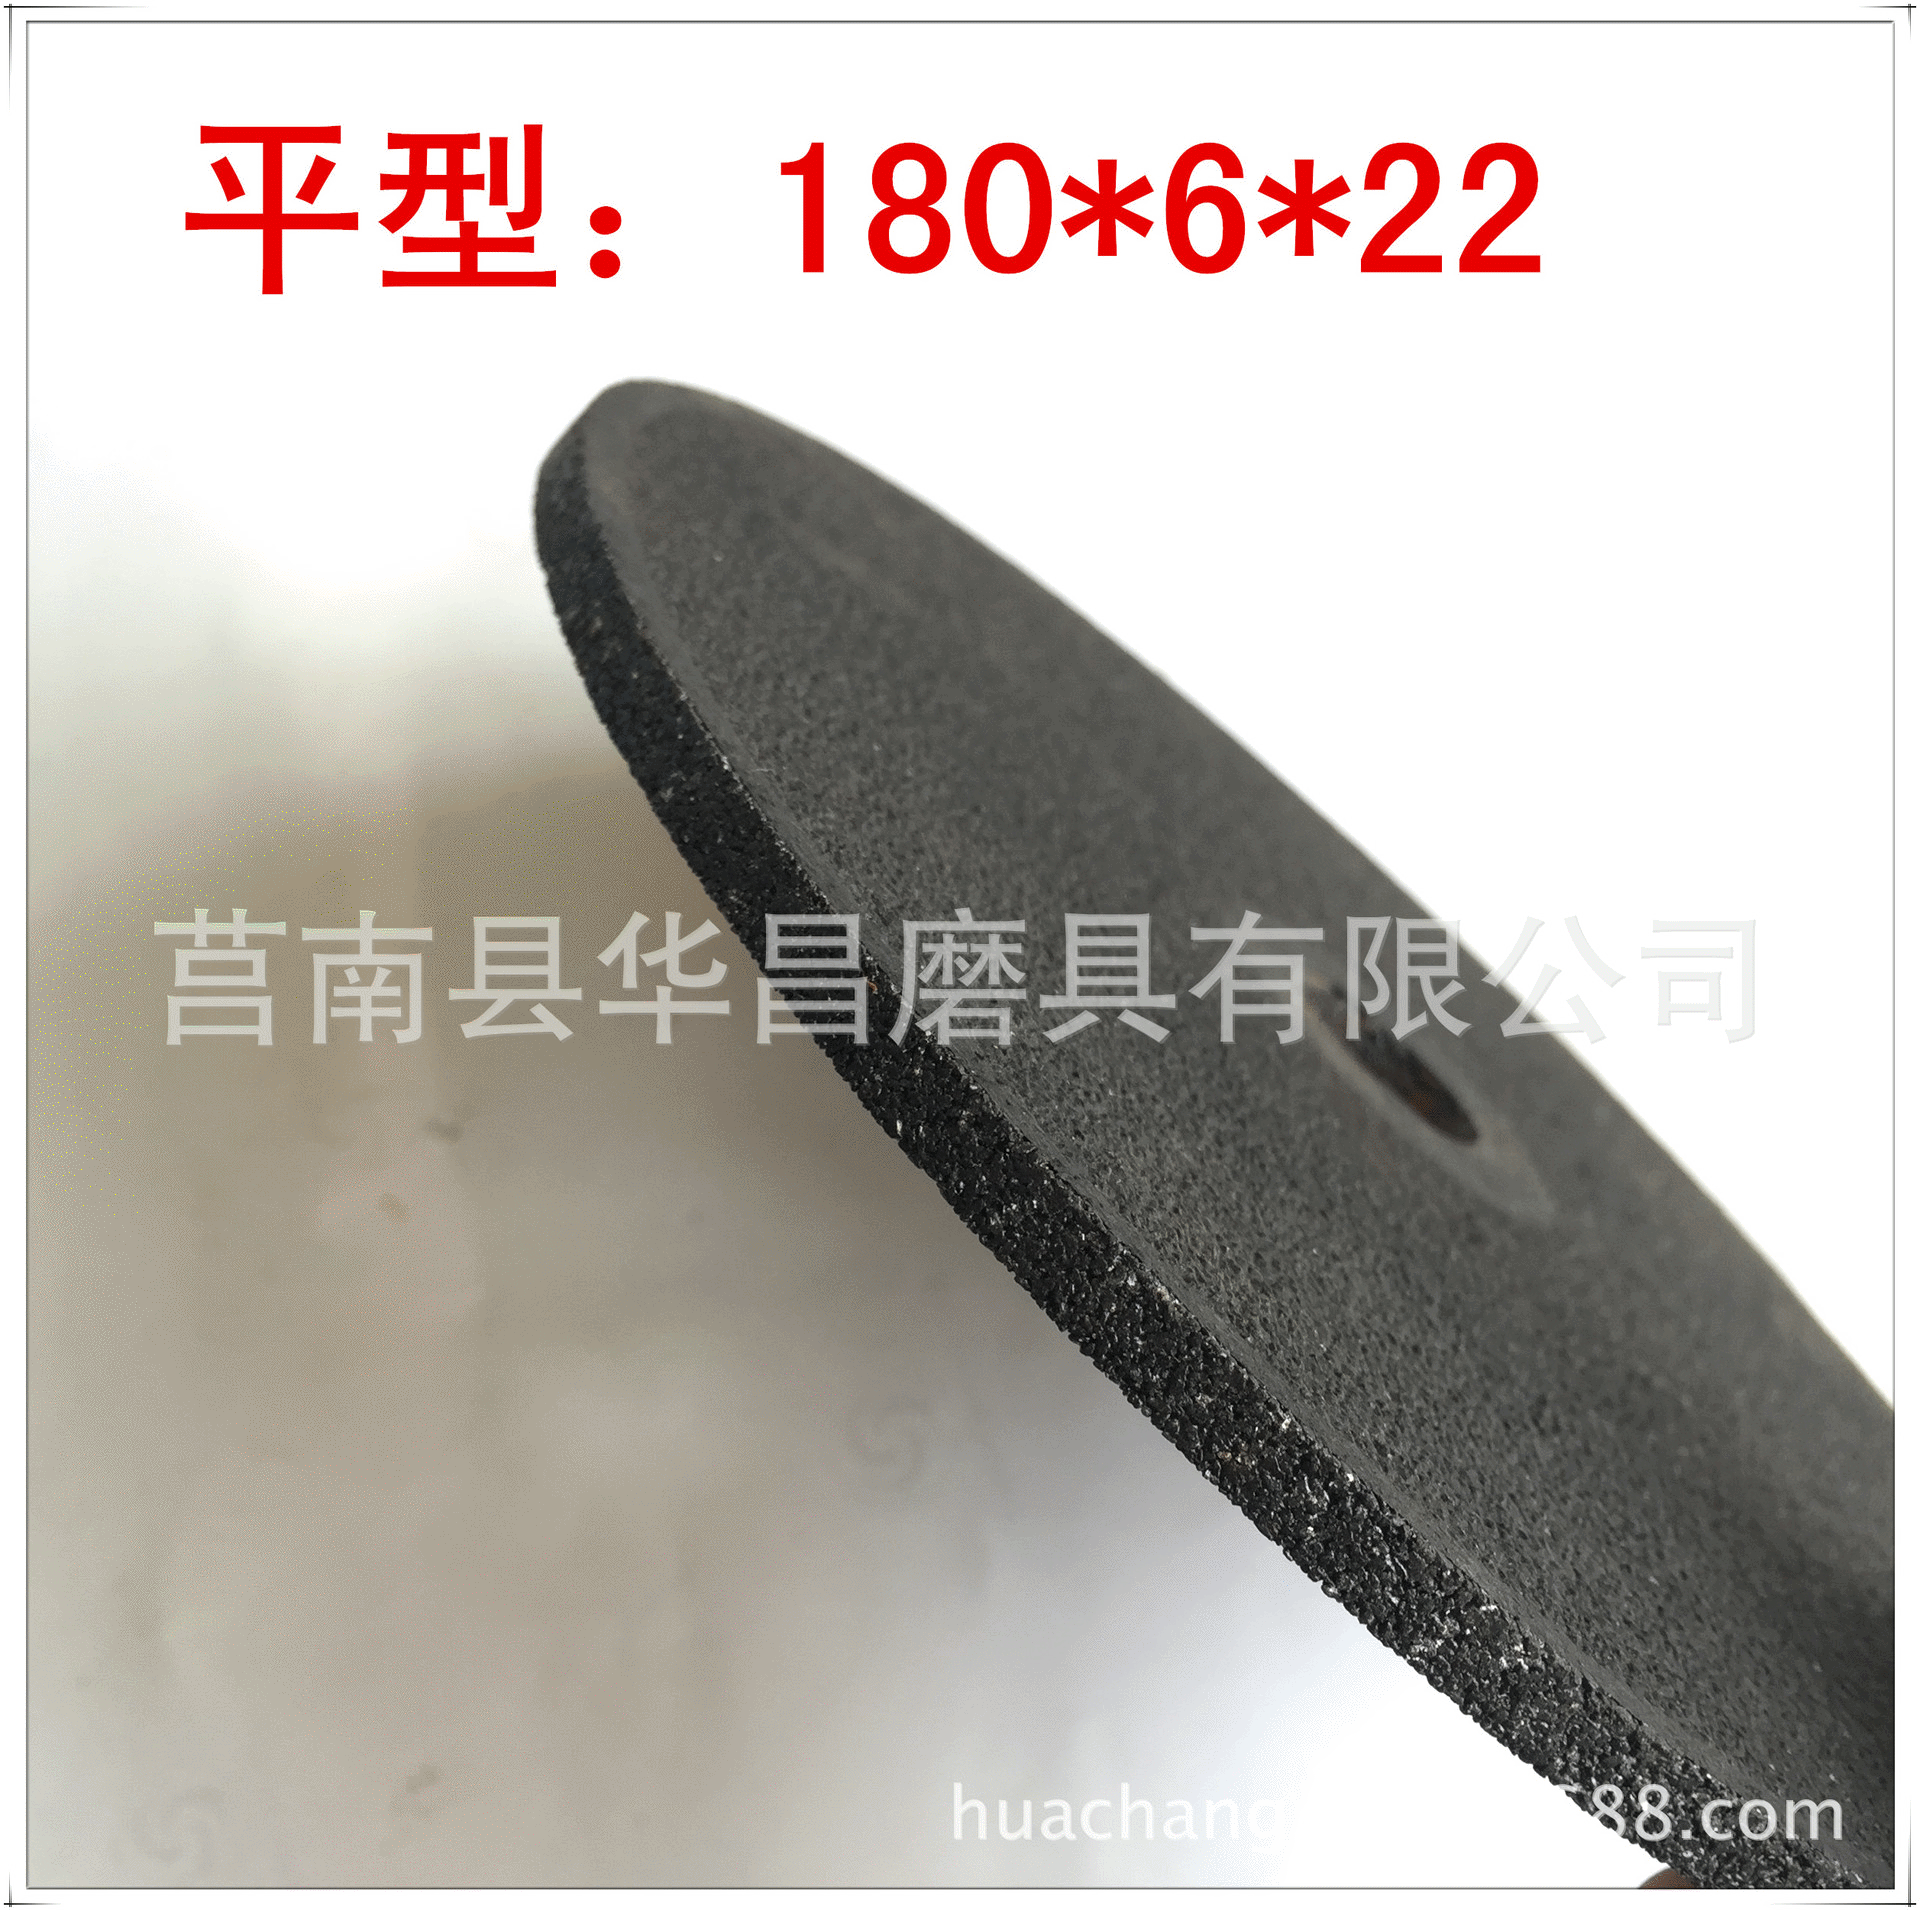 large Casting Dedicated Junan Manufacturer,Various Specifications resin Cutting blade Oilstone Abrasives